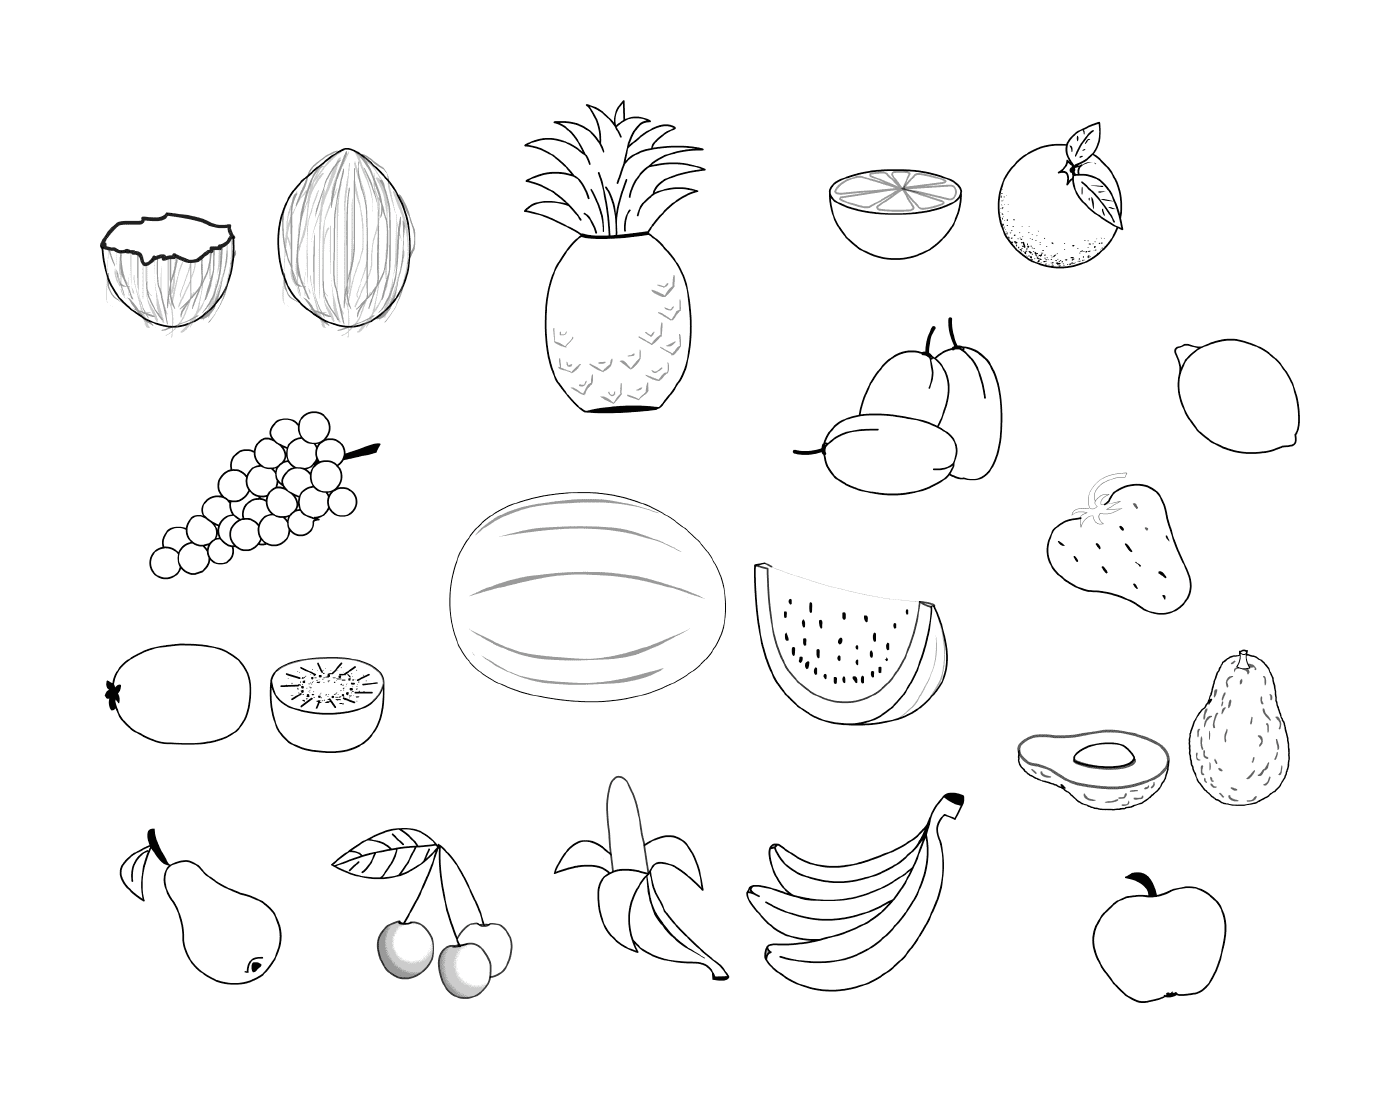  various fruits on this page 